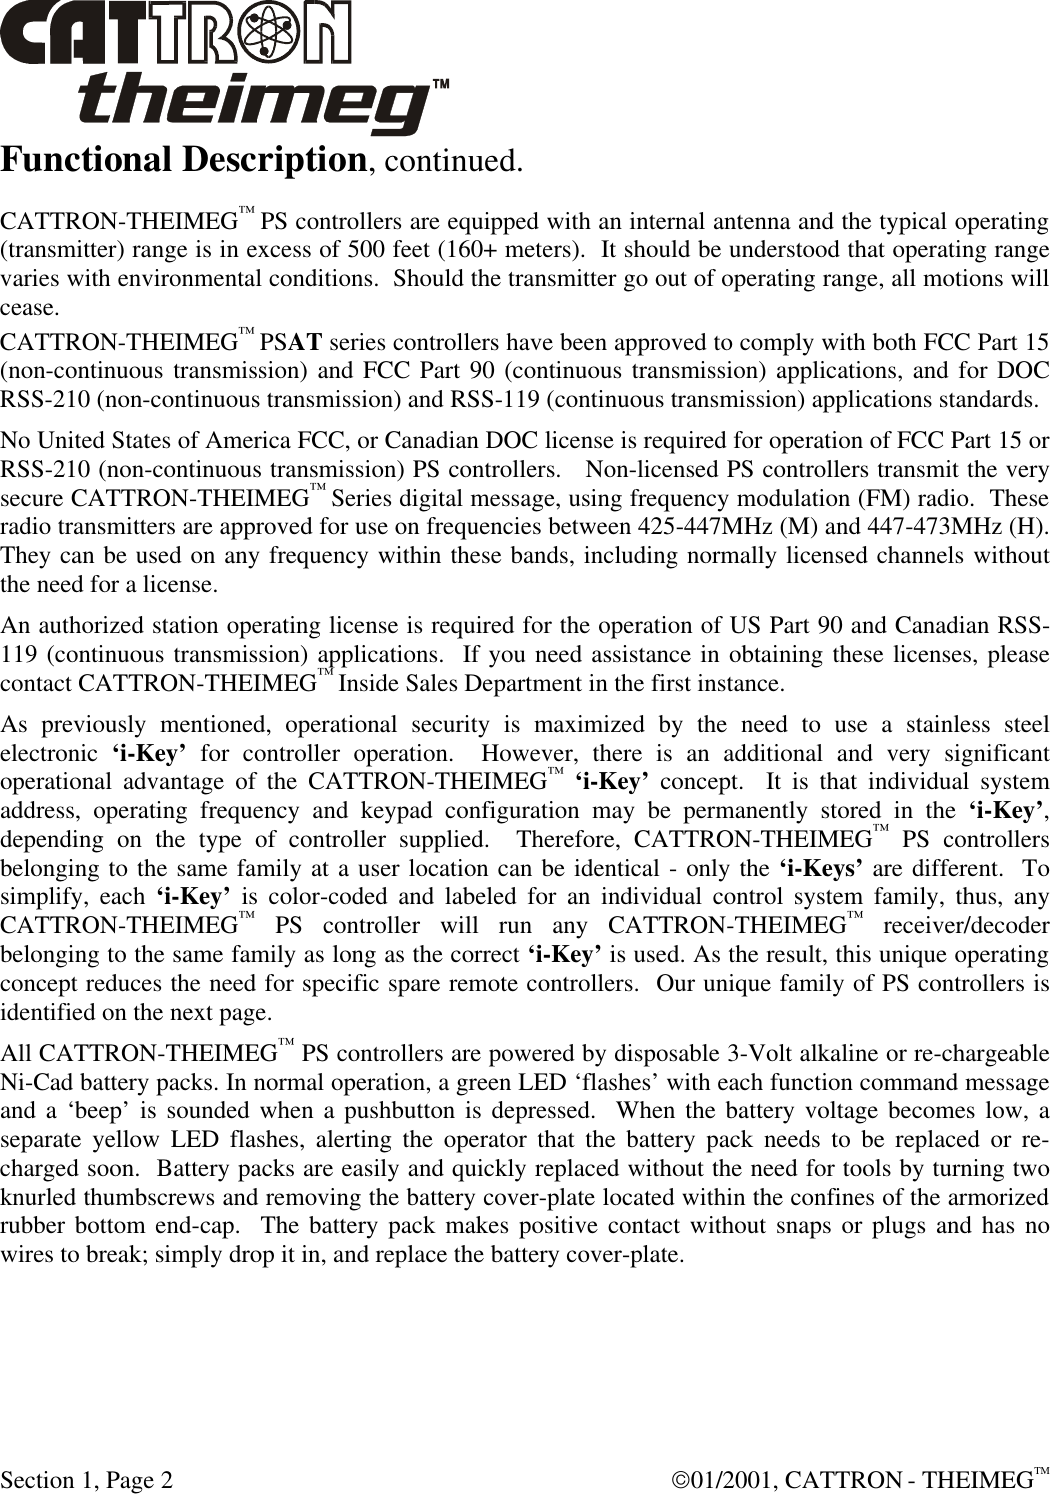  Section 1, Page 2  01/2001, CATTRON - THEIMEGTM Functional Description, continued. CATTRON-THEIMEG™ PS controllers are equipped with an internal antenna and the typical operating (transmitter) range is in excess of 500 feet (160+ meters).  It should be understood that operating range varies with environmental conditions.  Should the transmitter go out of operating range, all motions will cease. CATTRON-THEIMEG™ PSAT series controllers have been approved to comply with both FCC Part 15 (non-continuous transmission) and FCC Part 90 (continuous transmission) applications, and for DOC RSS-210 (non-continuous transmission) and RSS-119 (continuous transmission) applications standards. No United States of America FCC, or Canadian DOC license is required for operation of FCC Part 15 or RSS-210 (non-continuous transmission) PS controllers.   Non-licensed PS controllers transmit the very secure CATTRON-THEIMEG™ Series digital message, using frequency modulation (FM) radio.  These radio transmitters are approved for use on frequencies between 425-447MHz (M) and 447-473MHz (H).  They can be used on any frequency within these bands, including normally licensed channels without the need for a license.   An authorized station operating license is required for the operation of US Part 90 and Canadian RSS-119 (continuous transmission) applications.  If you need assistance in obtaining these licenses, please contact CATTRON-THEIMEG™ Inside Sales Department in the first instance.  As previously mentioned, operational security is maximized by the need to use a stainless steel electronic ‘i-Key’ for controller operation.  However, there is an additional and very significant operational advantage of the CATTRON-THEIMEG™ ‘i-Key’ concept.  It is that individual system address, operating frequency and keypad configuration may be permanently stored in the ‘i-Key’, depending on the type of controller supplied.  Therefore, CATTRON-THEIMEG™ PS controllers belonging to the same family at a user location can be identical - only the ‘i-Keys’ are different.  To simplify, each ‘i-Key’ is color-coded and labeled for an individual control system family, thus, any CATTRON-THEIMEG™ PS controller will run any CATTRON-THEIMEG™ receiver/decoder belonging to the same family as long as the correct ‘i-Key’ is used. As the result, this unique operating concept reduces the need for specific spare remote controllers.  Our unique family of PS controllers is identified on the next page. All CATTRON-THEIMEG™ PS controllers are powered by disposable 3-Volt alkaline or re-chargeable Ni-Cad battery packs. In normal operation, a green LED ‘flashes’ with each function command message and a ‘beep’ is sounded when a pushbutton is depressed.  When the battery voltage becomes low, a separate yellow LED flashes, alerting the operator that the battery pack needs to be replaced or re-charged soon.  Battery packs are easily and quickly replaced without the need for tools by turning two knurled thumbscrews and removing the battery cover-plate located within the confines of the armorized rubber bottom end-cap.  The battery pack makes positive contact without snaps or plugs and has no wires to break; simply drop it in, and replace the battery cover-plate. 